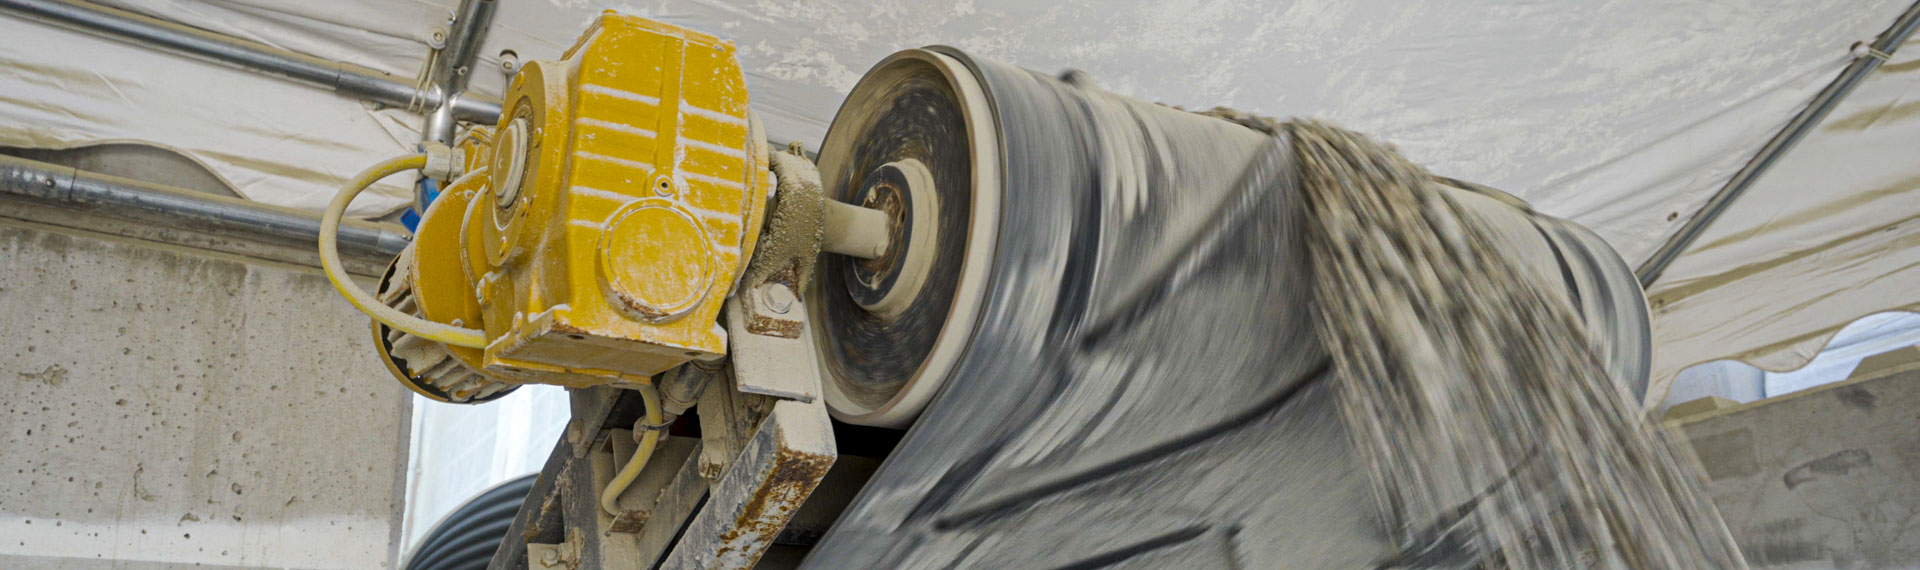 A Hardox® 500 steel core makes it possible to recycle cement at Smart Circular Products